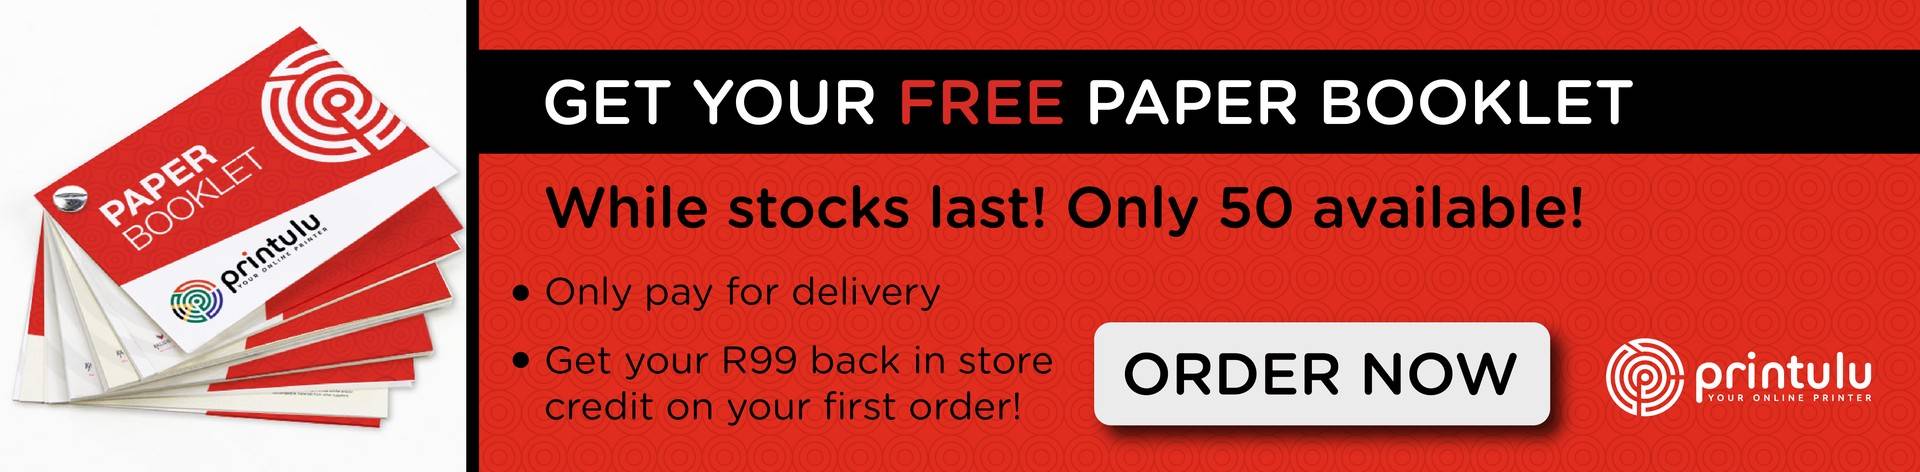 Free Paper booklet only pay R99 for delivery! 